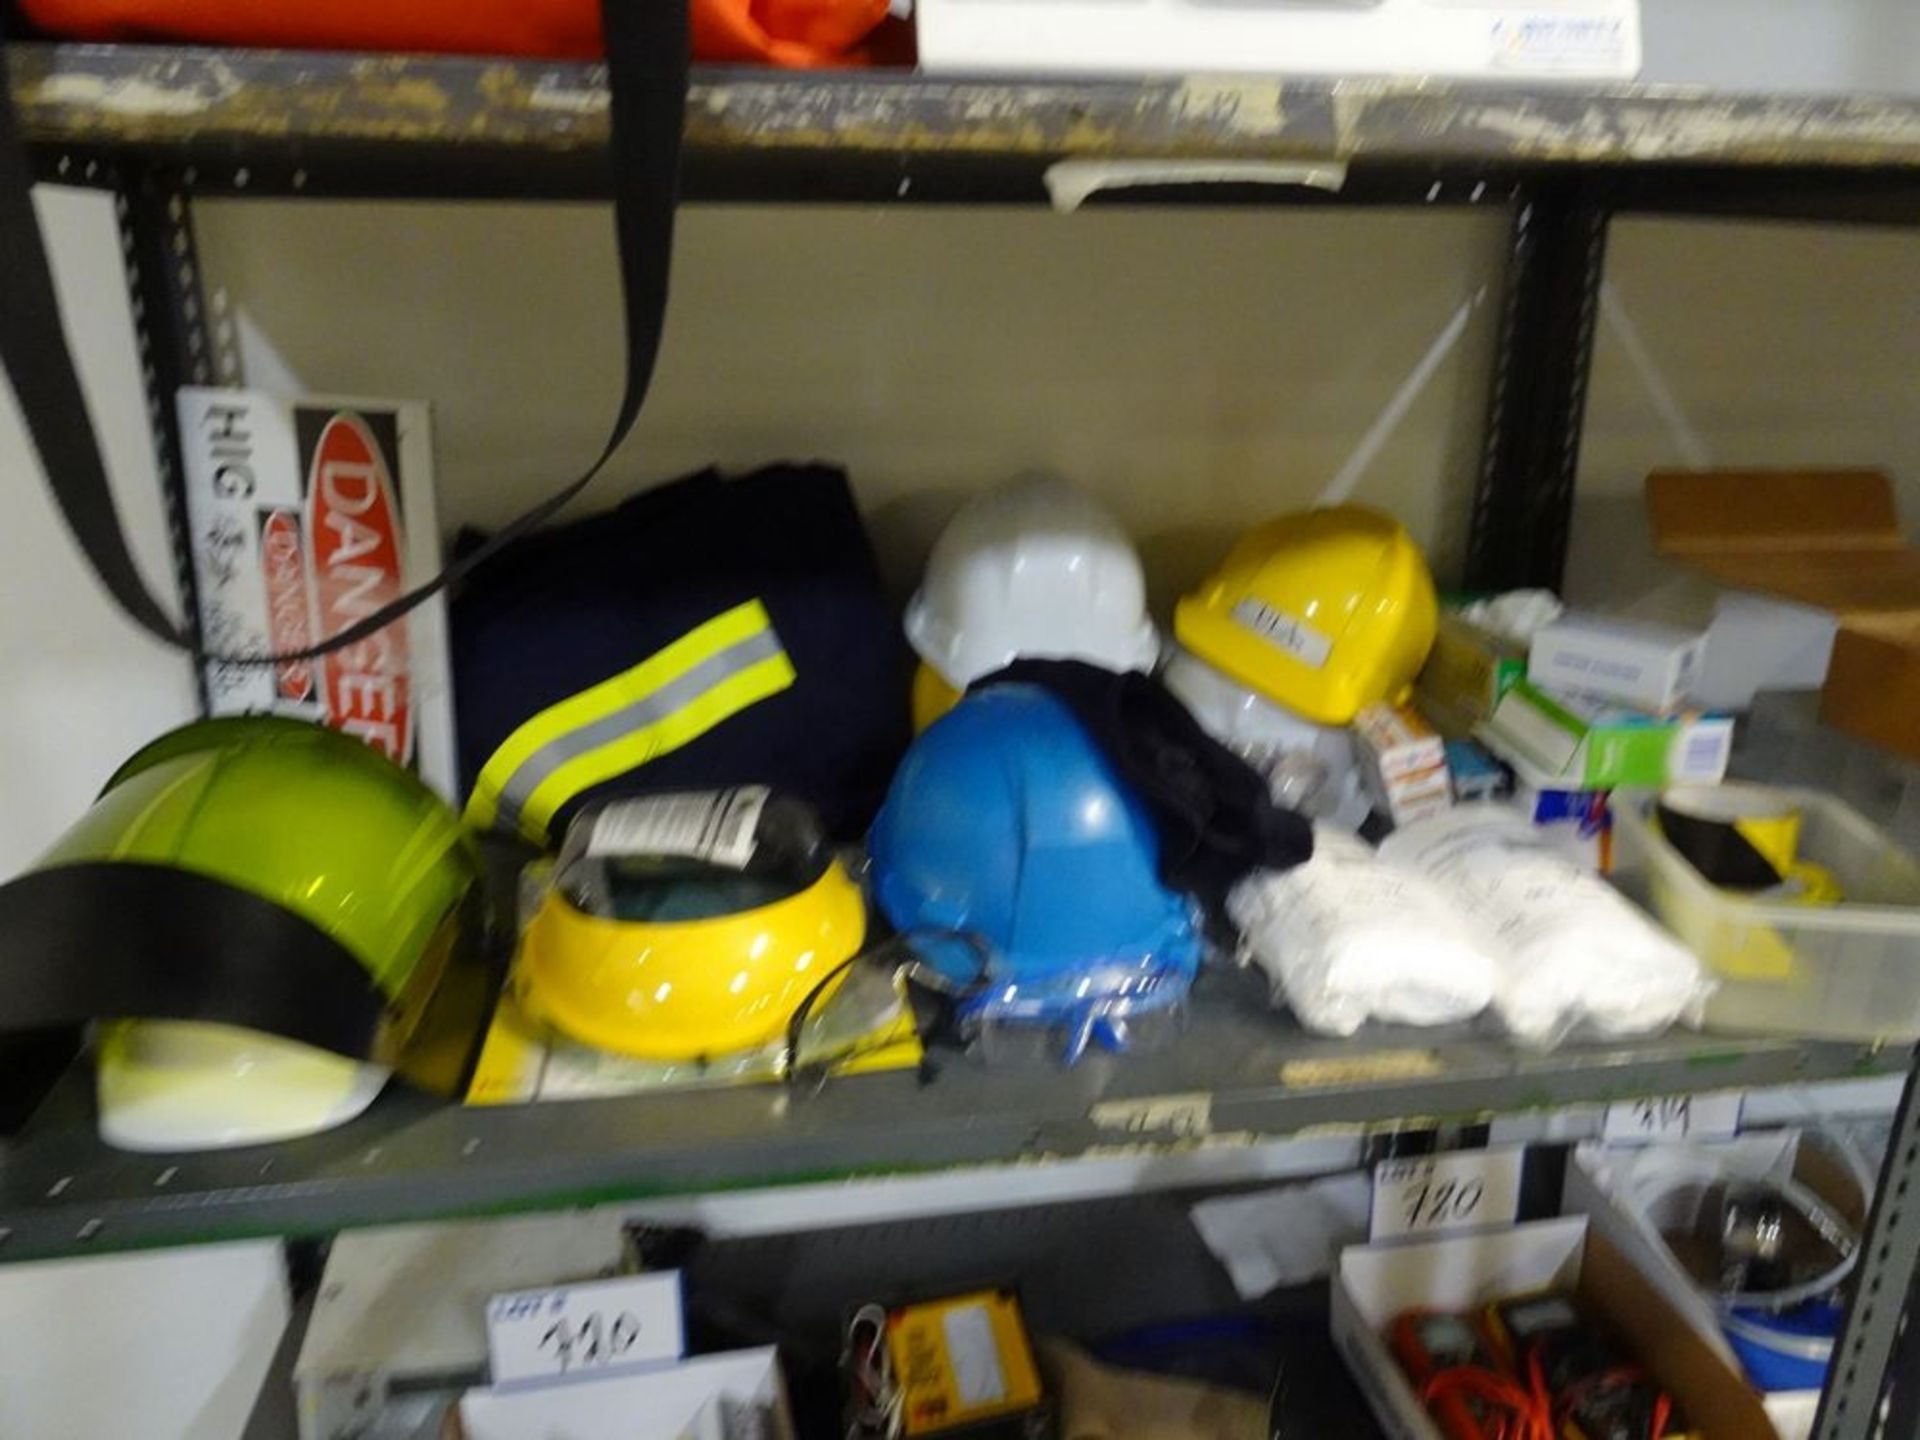 ASSORTED PRODUCT, SAFETY SUPPLIES, ELECTRICAL TESTERS, ETC. - Image 2 of 5